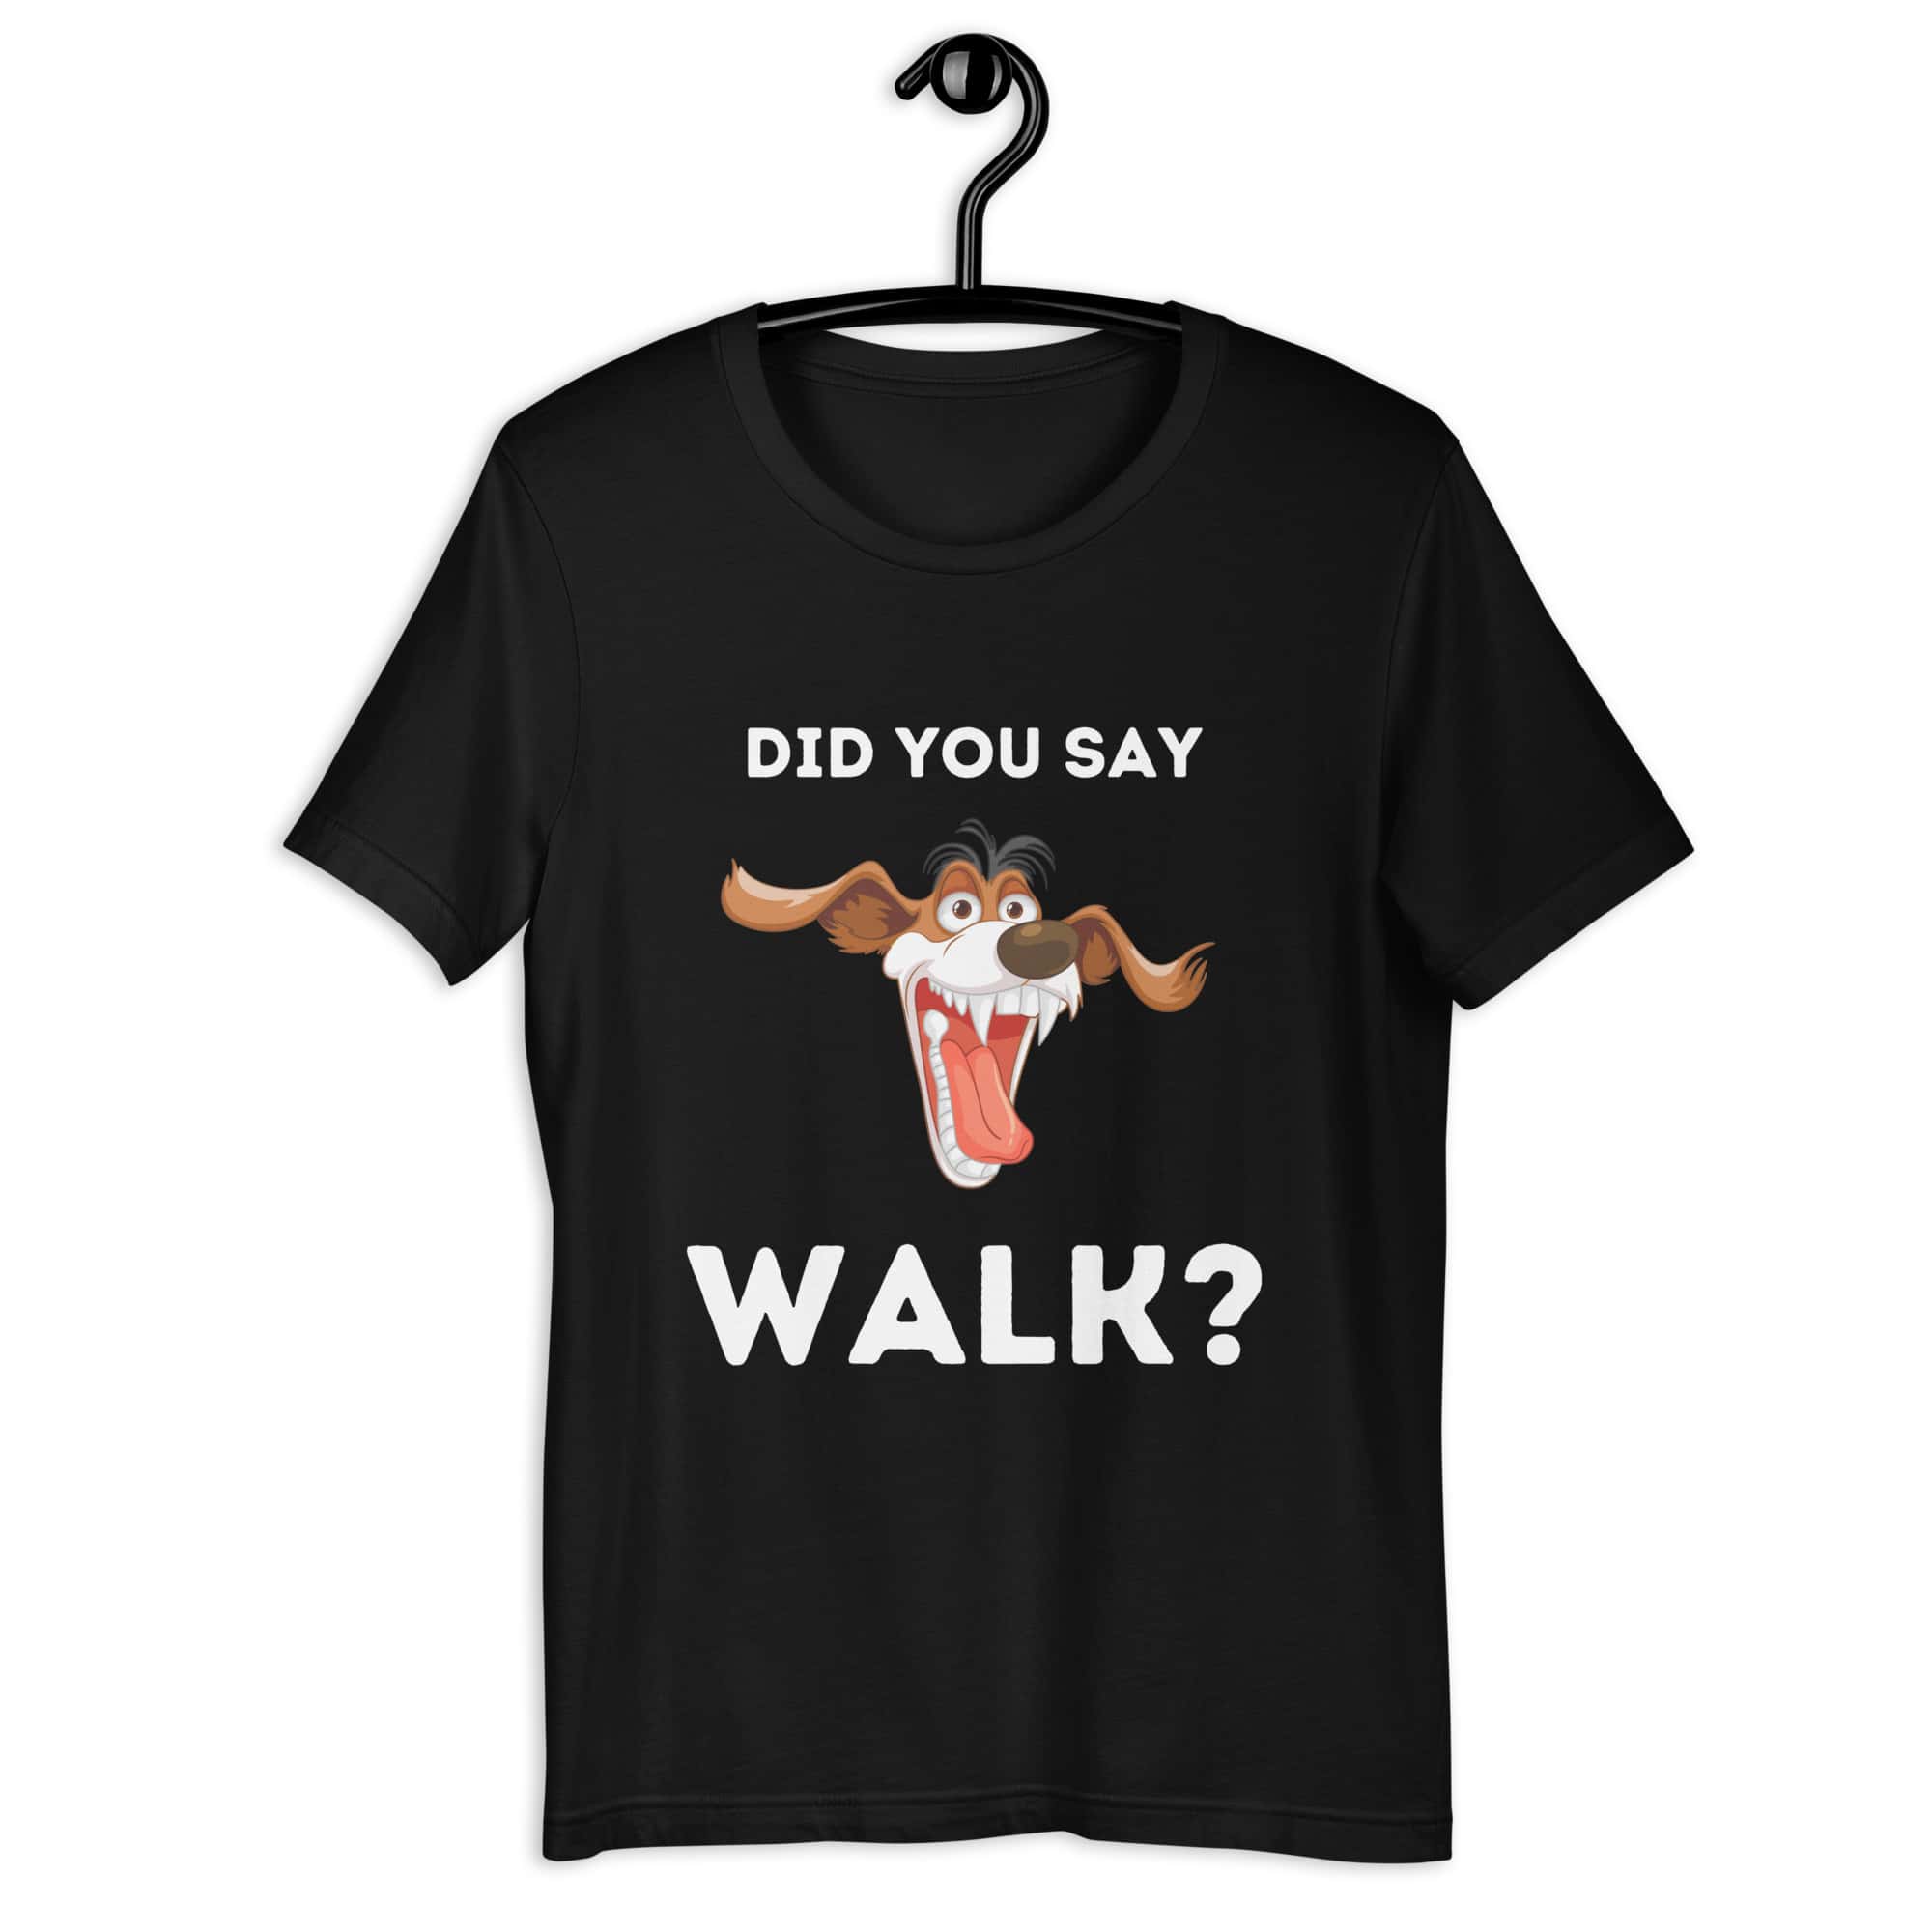 The "Funny 'Did You Say Walk?' Dog Unisex T-Shirt" captures the excitement dogs feel at the mention of a walk. Made from a comfortable, durable blend, it features a vibrant graphic that dog lovers will relate to. Available in various sizes and colors, it's perfect for casual wear, highlighting a universal moment in dog ownership with humor and style. Black